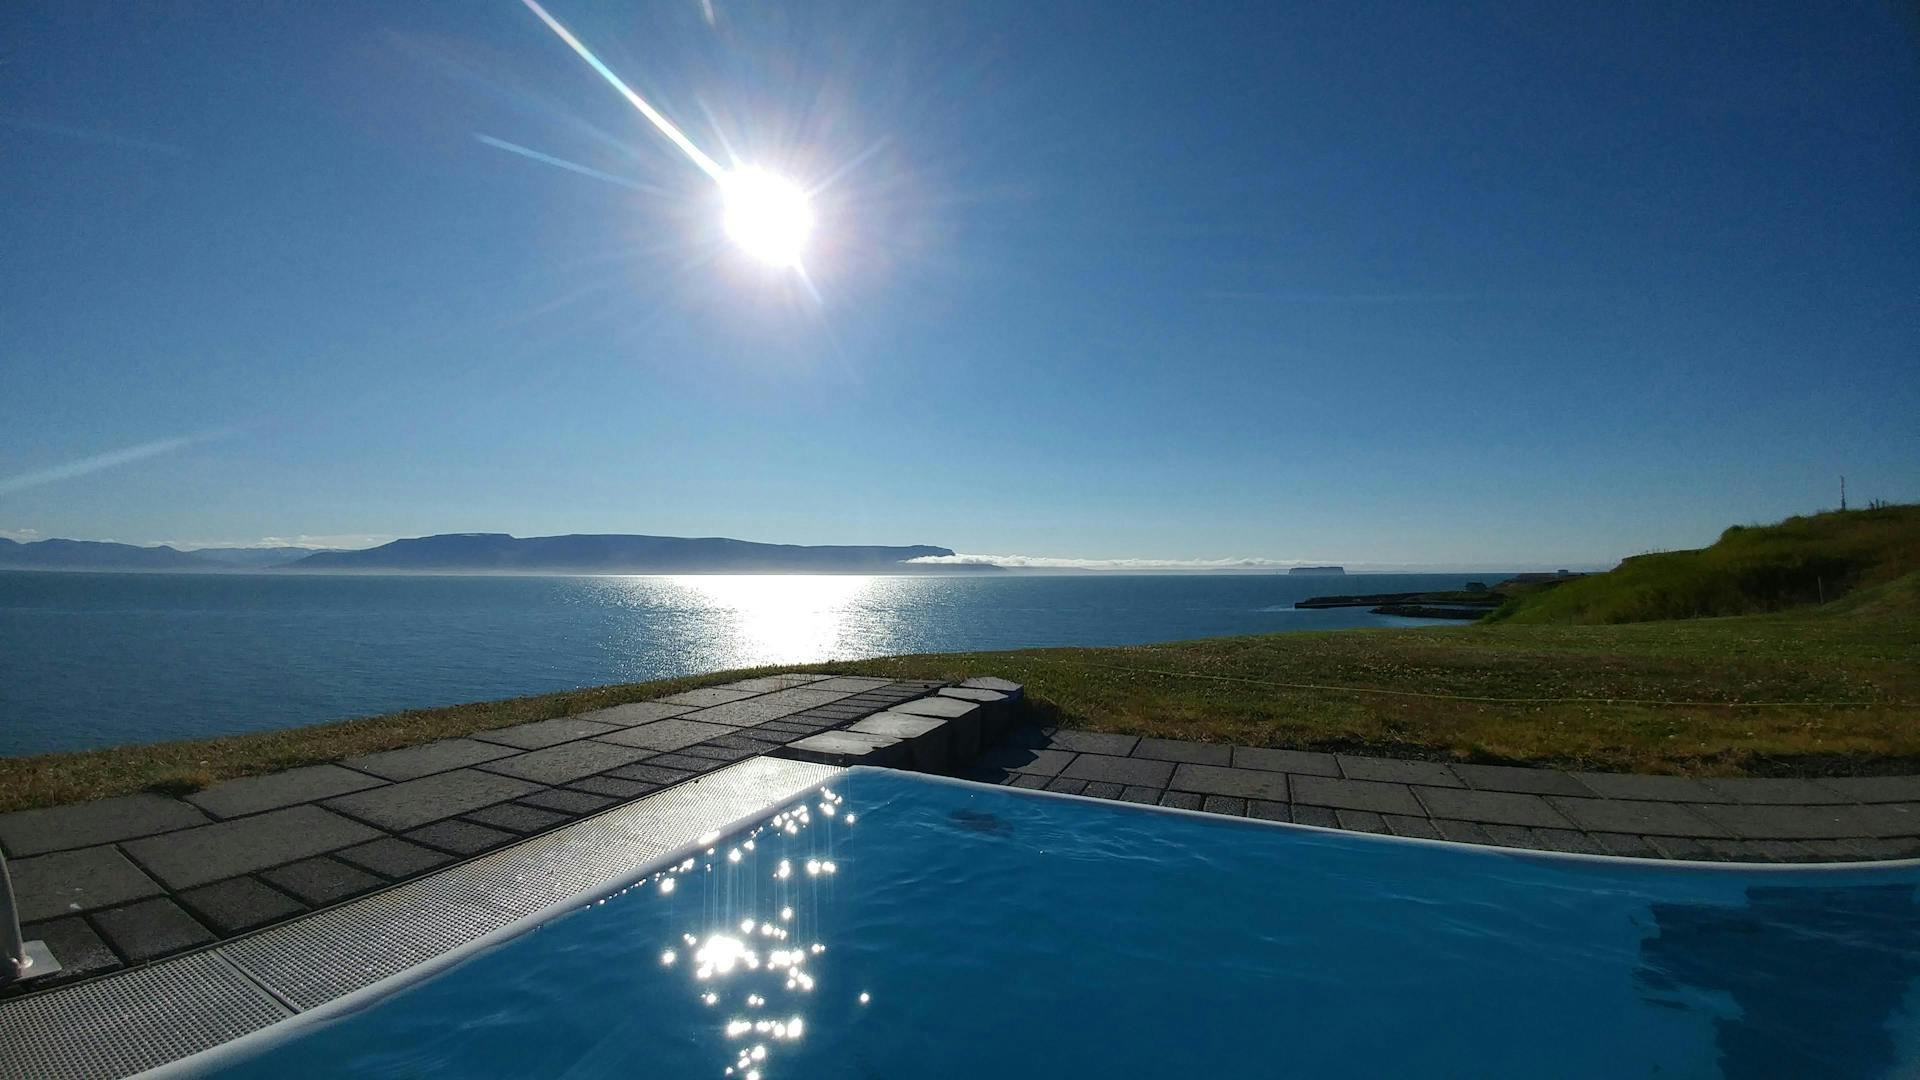 The ocean seen from a swimming pool, sun is shining above. 